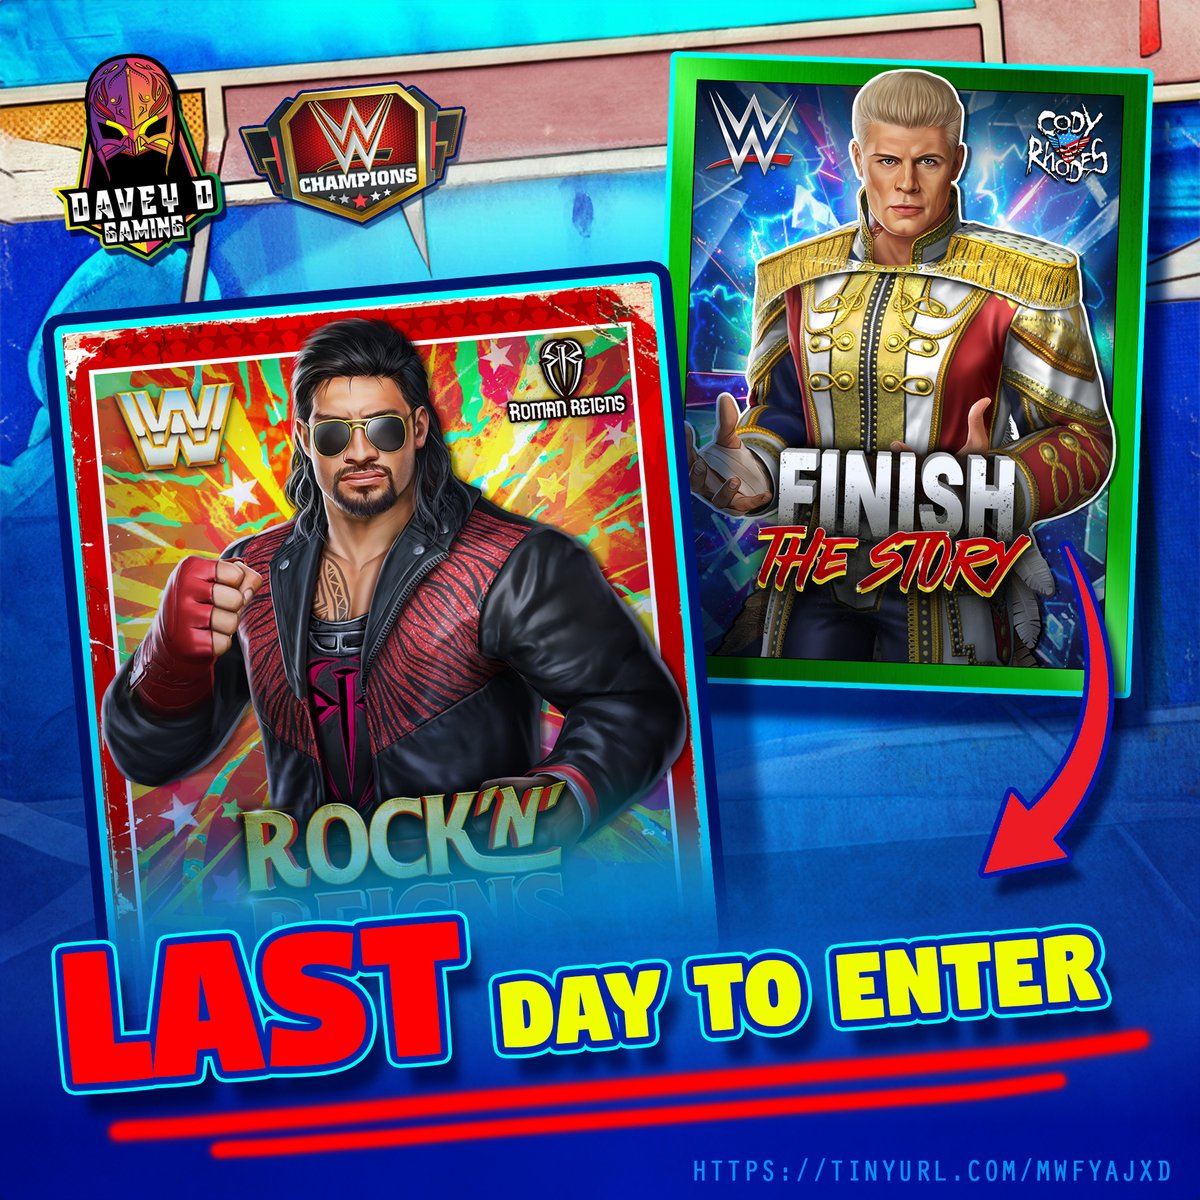 🚨 LAST CHANCE! ⏰ Enter now to WIN big! 🎉 Click 👉 tinyurl.com/mwfyajxd 👈 Prizes are a 5SG Rock'n' @WWERomanReigns, 6SB @CodyRhodes, or a #WrestleMania moment! @TheRock @wwe @scopely @IamFirpo @WWEChampions #FinishTheStory #giveaway 🎁🔥